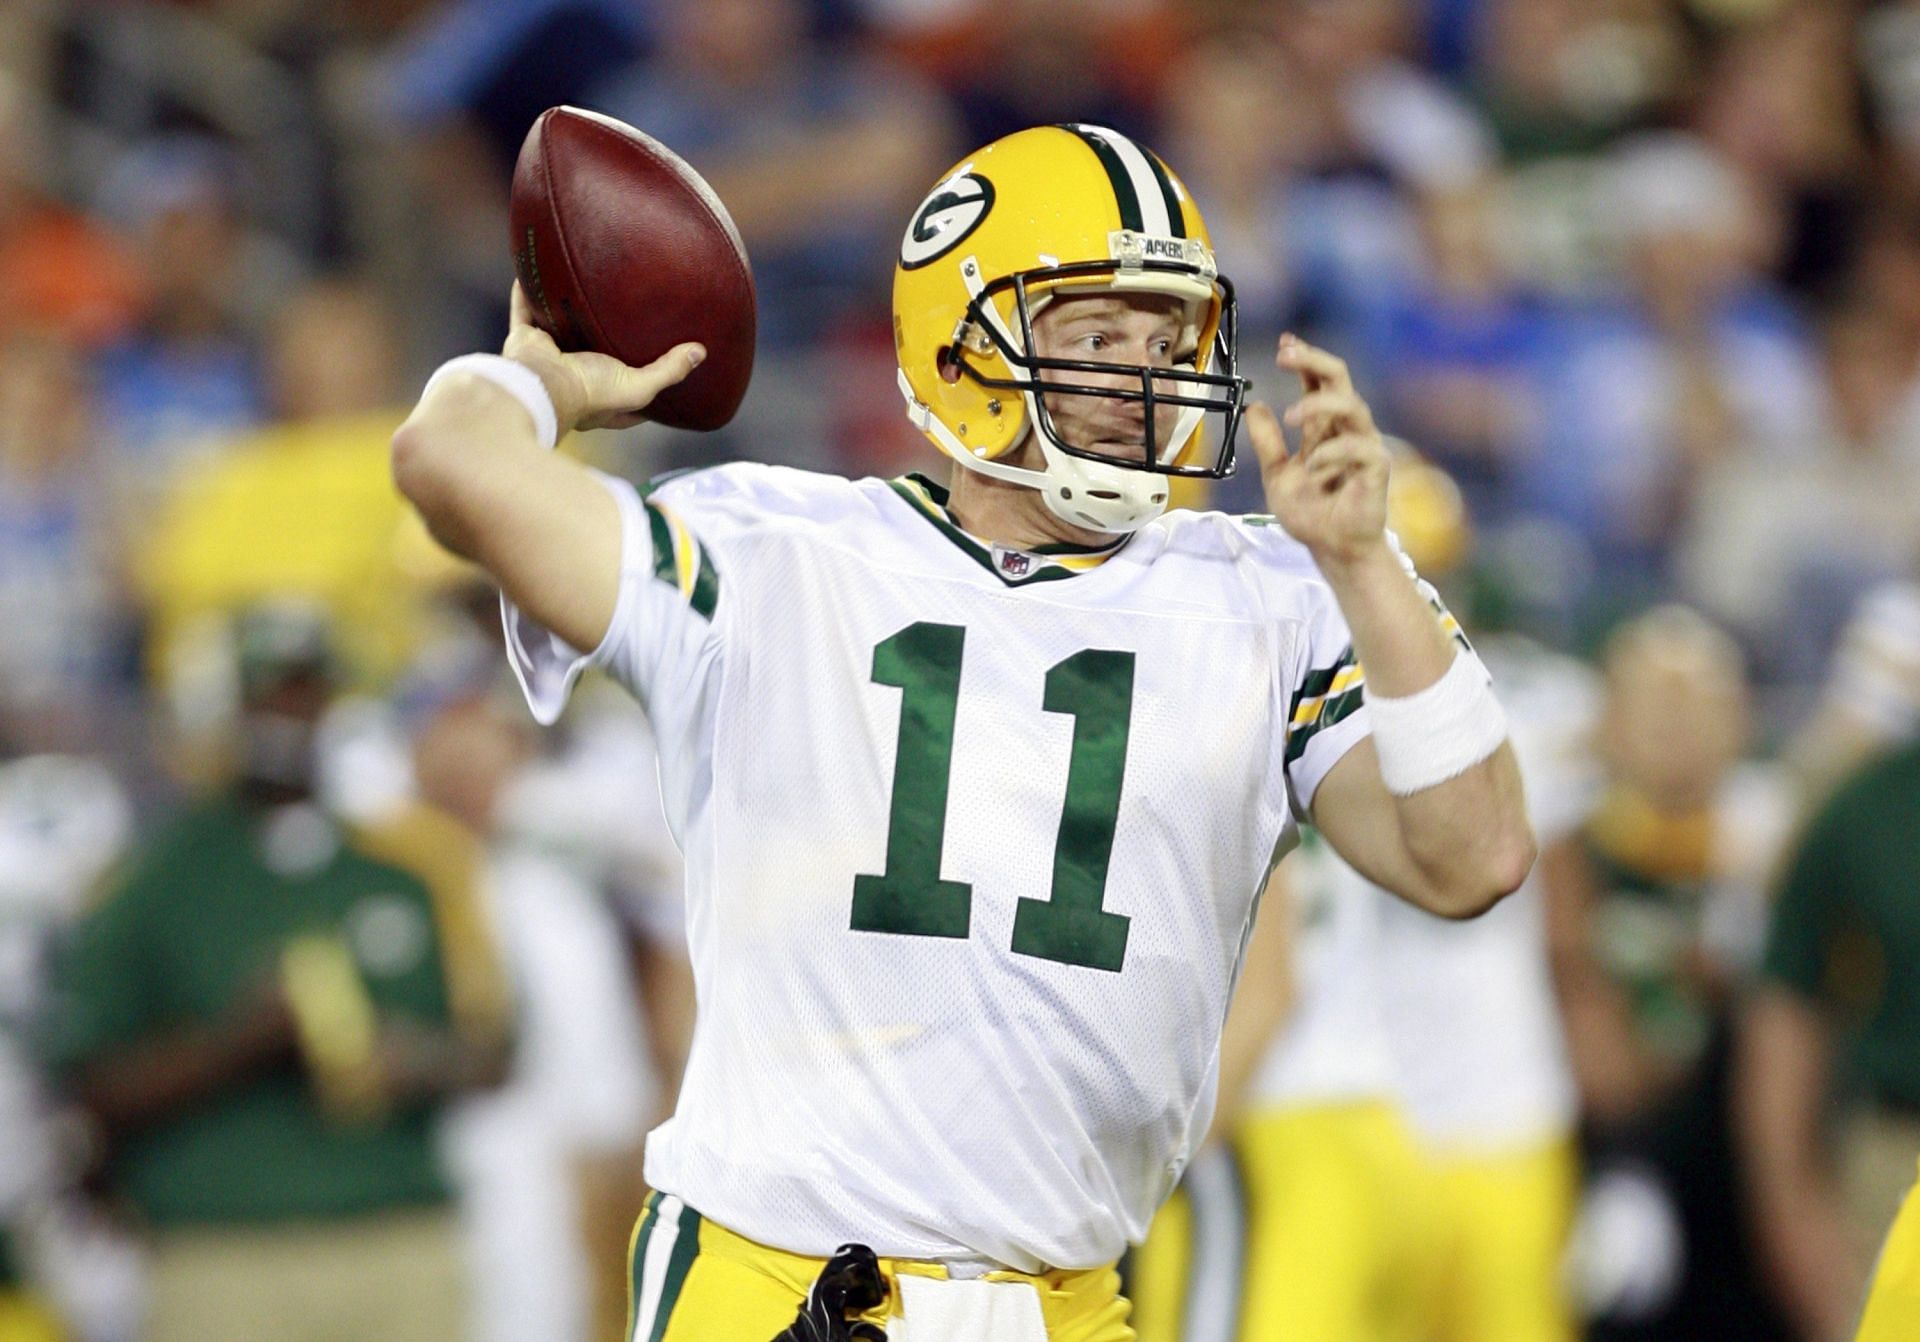 Brohm never materialized as the franchise QB for the Green Bay Packers